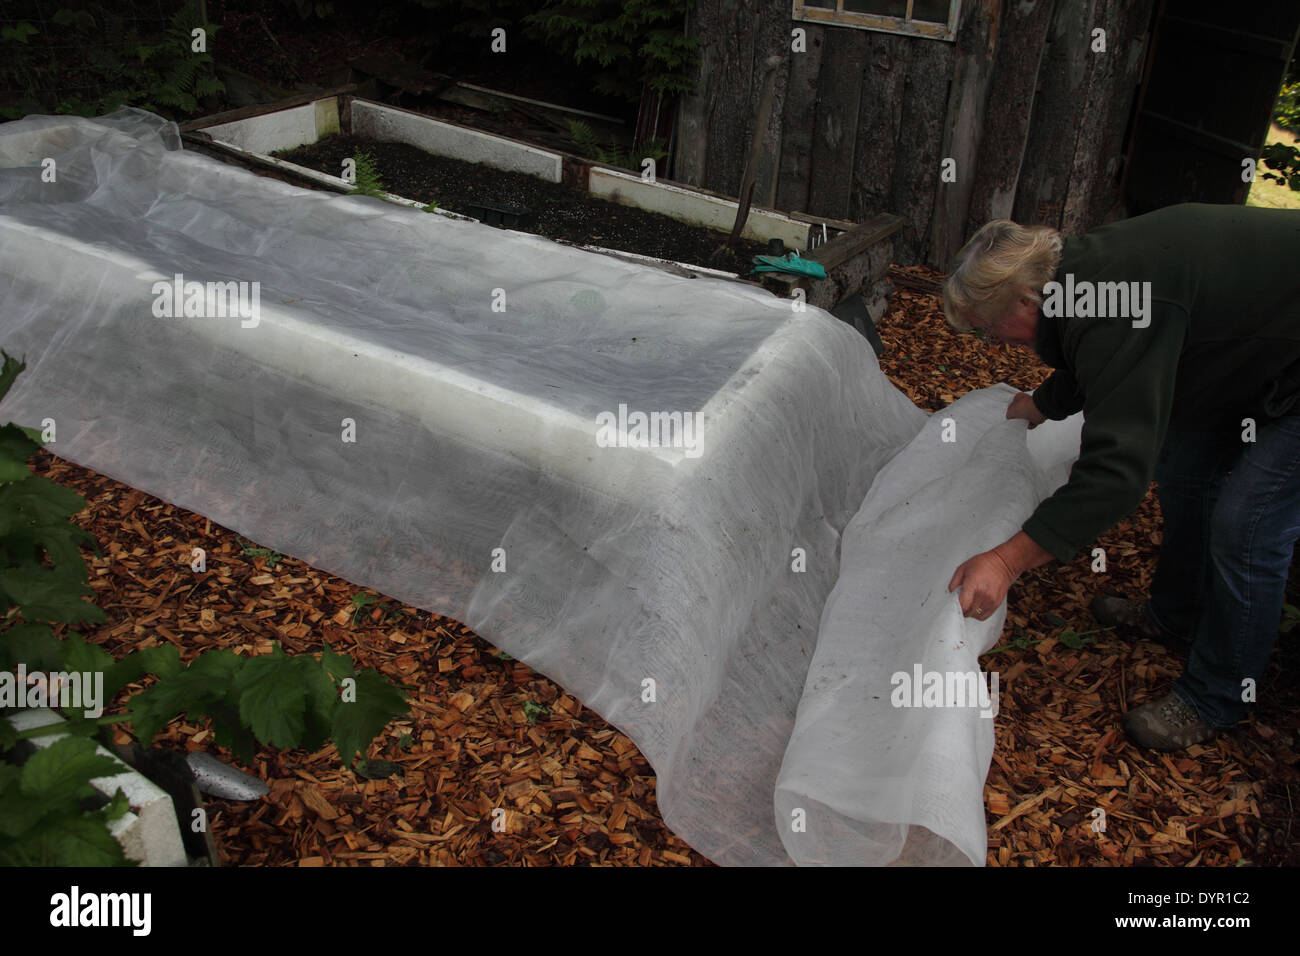 Covering cabbage plants with enviromesh to ptotect against caterpillars Stock Photo